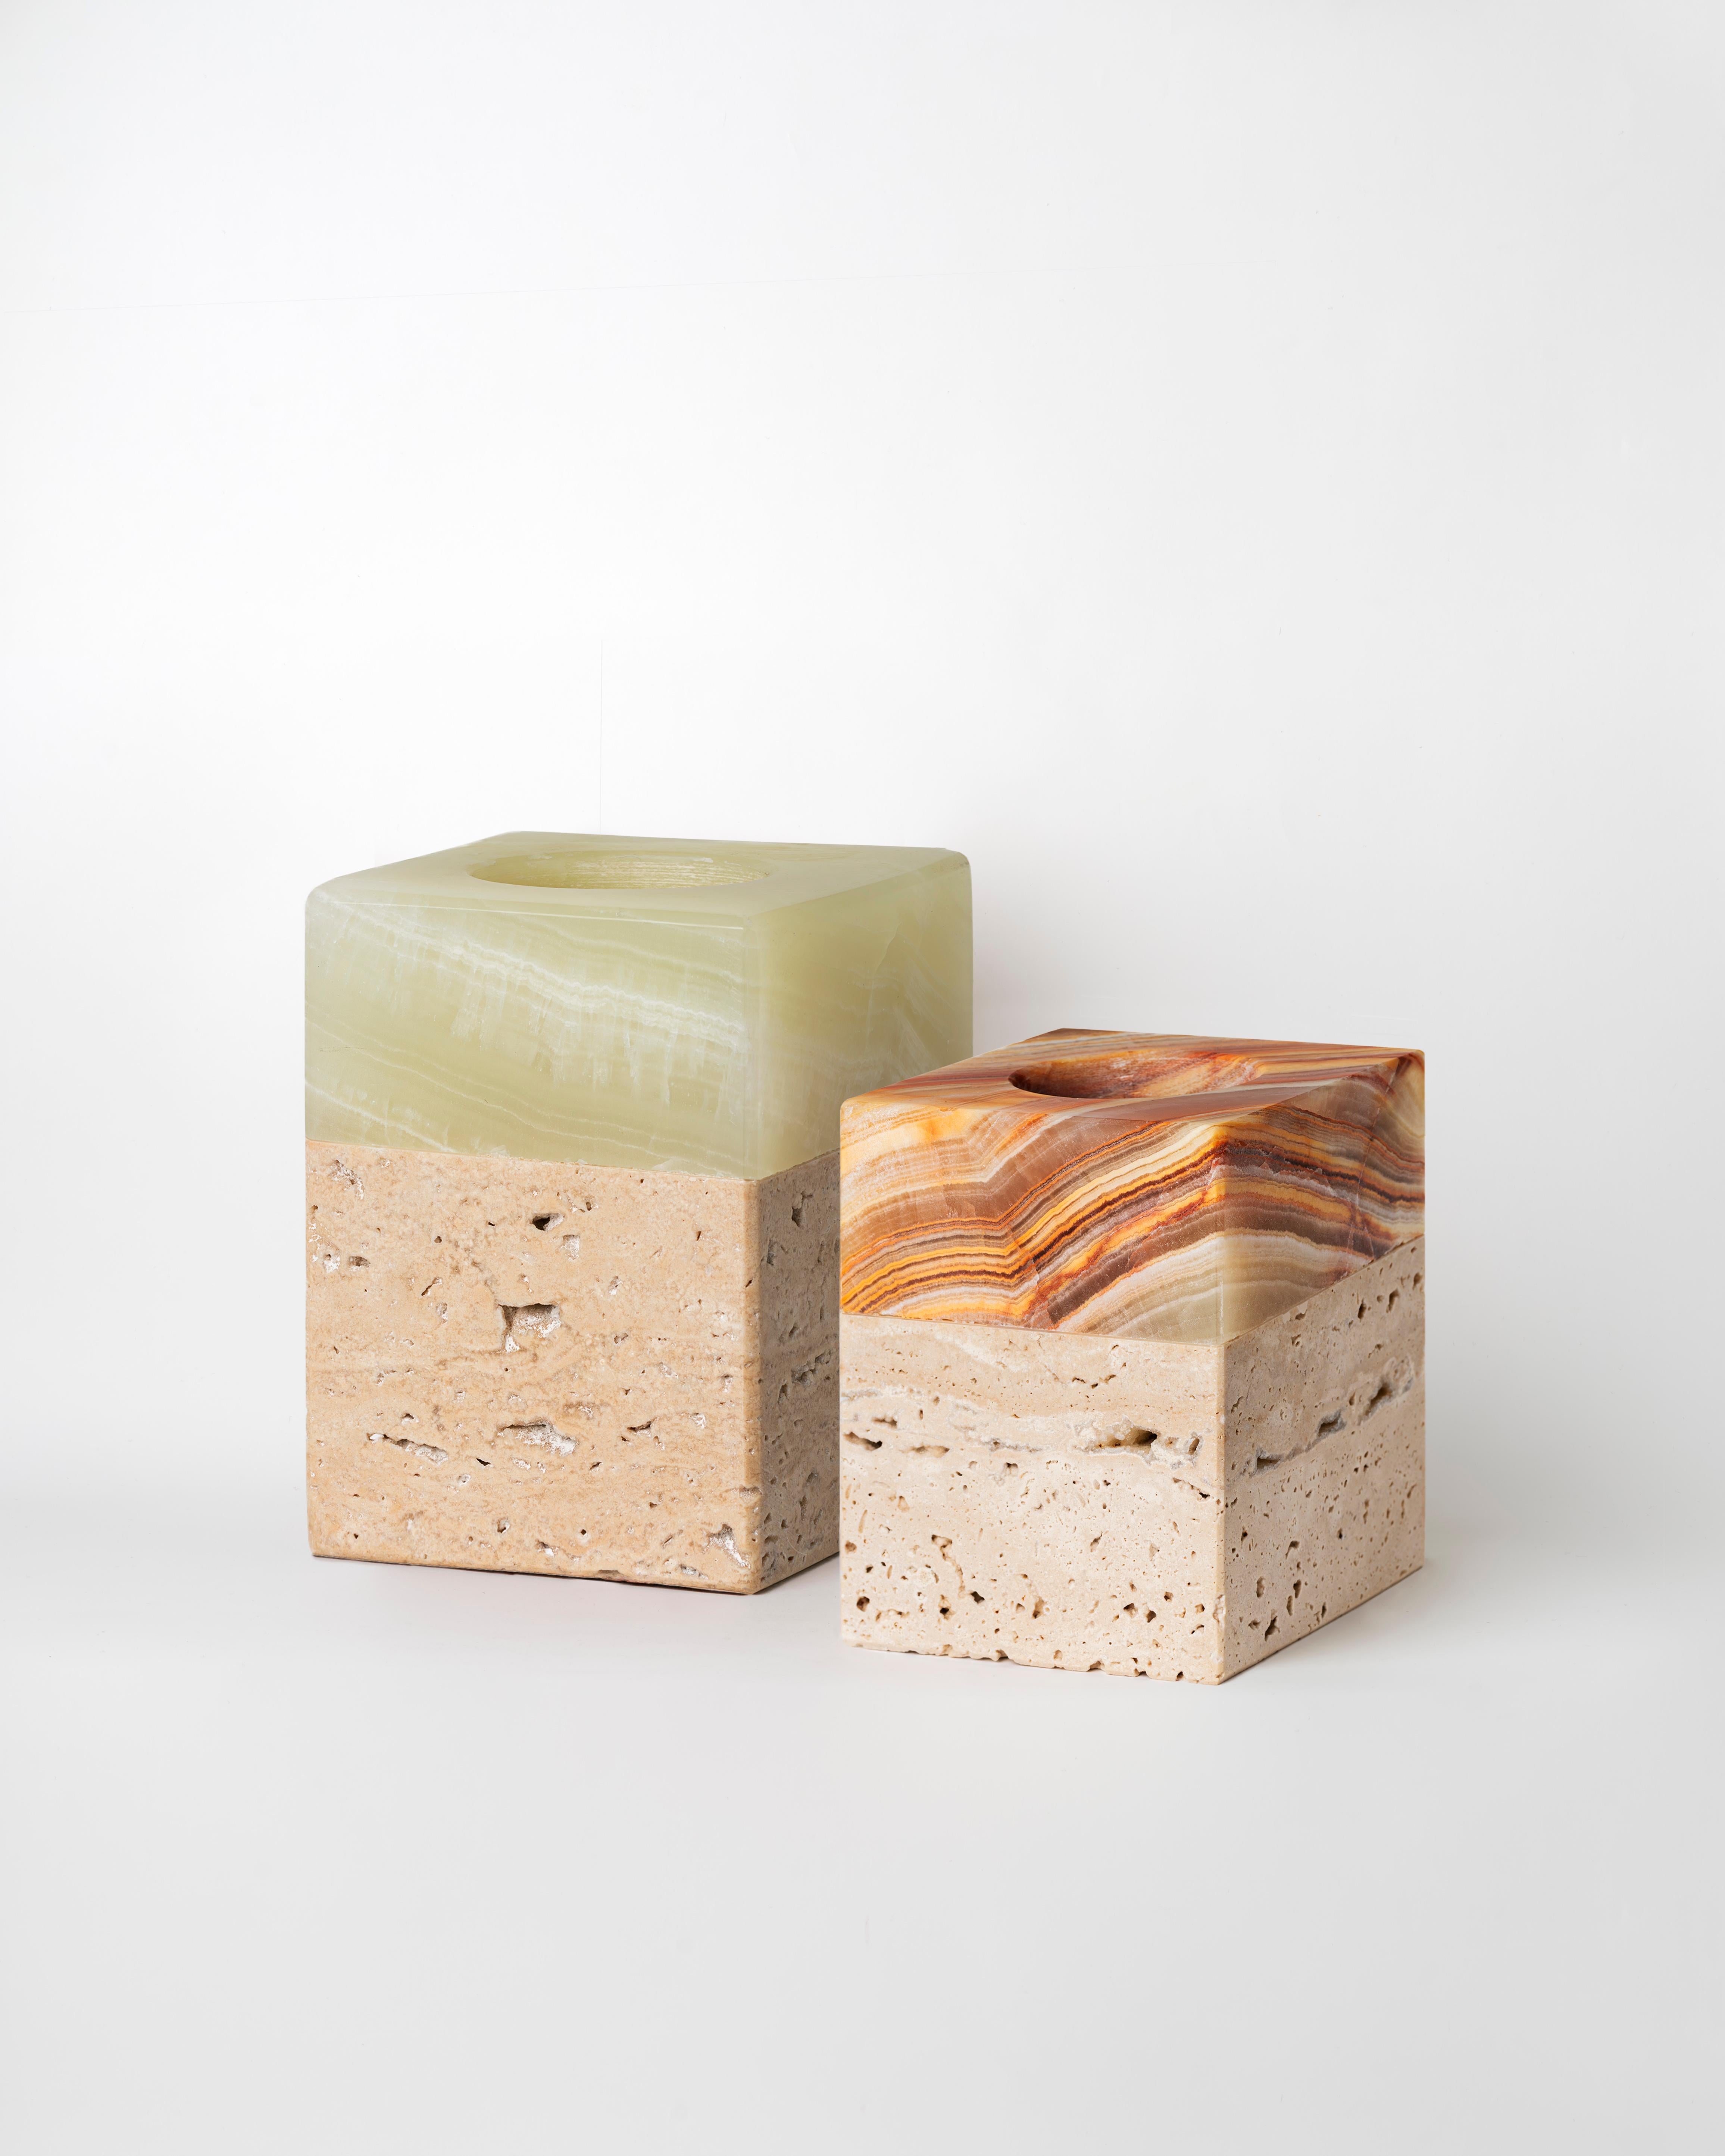 FEBE candles is a series of rectangular-shaped natural stone candleholders, available in 4 sizes. The travertine base, with its irregular surface, supports a precious lampshade in polished onyx, which glows in the light of the burning flame.
With a